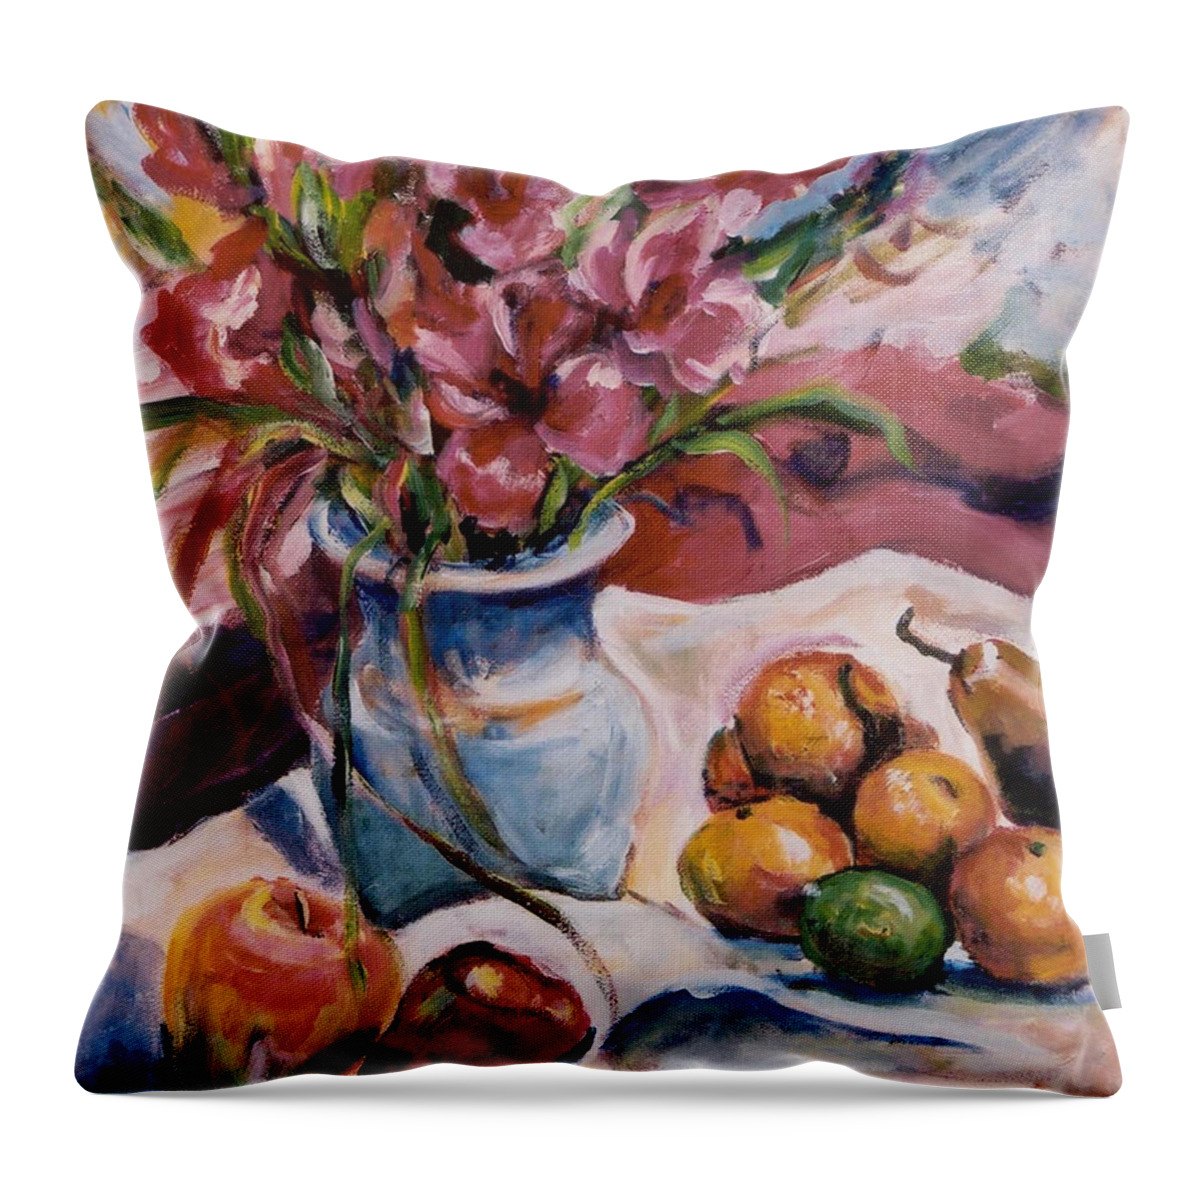 Ingrid Dohm Throw Pillow featuring the painting Gladiolas by Ingrid Dohm